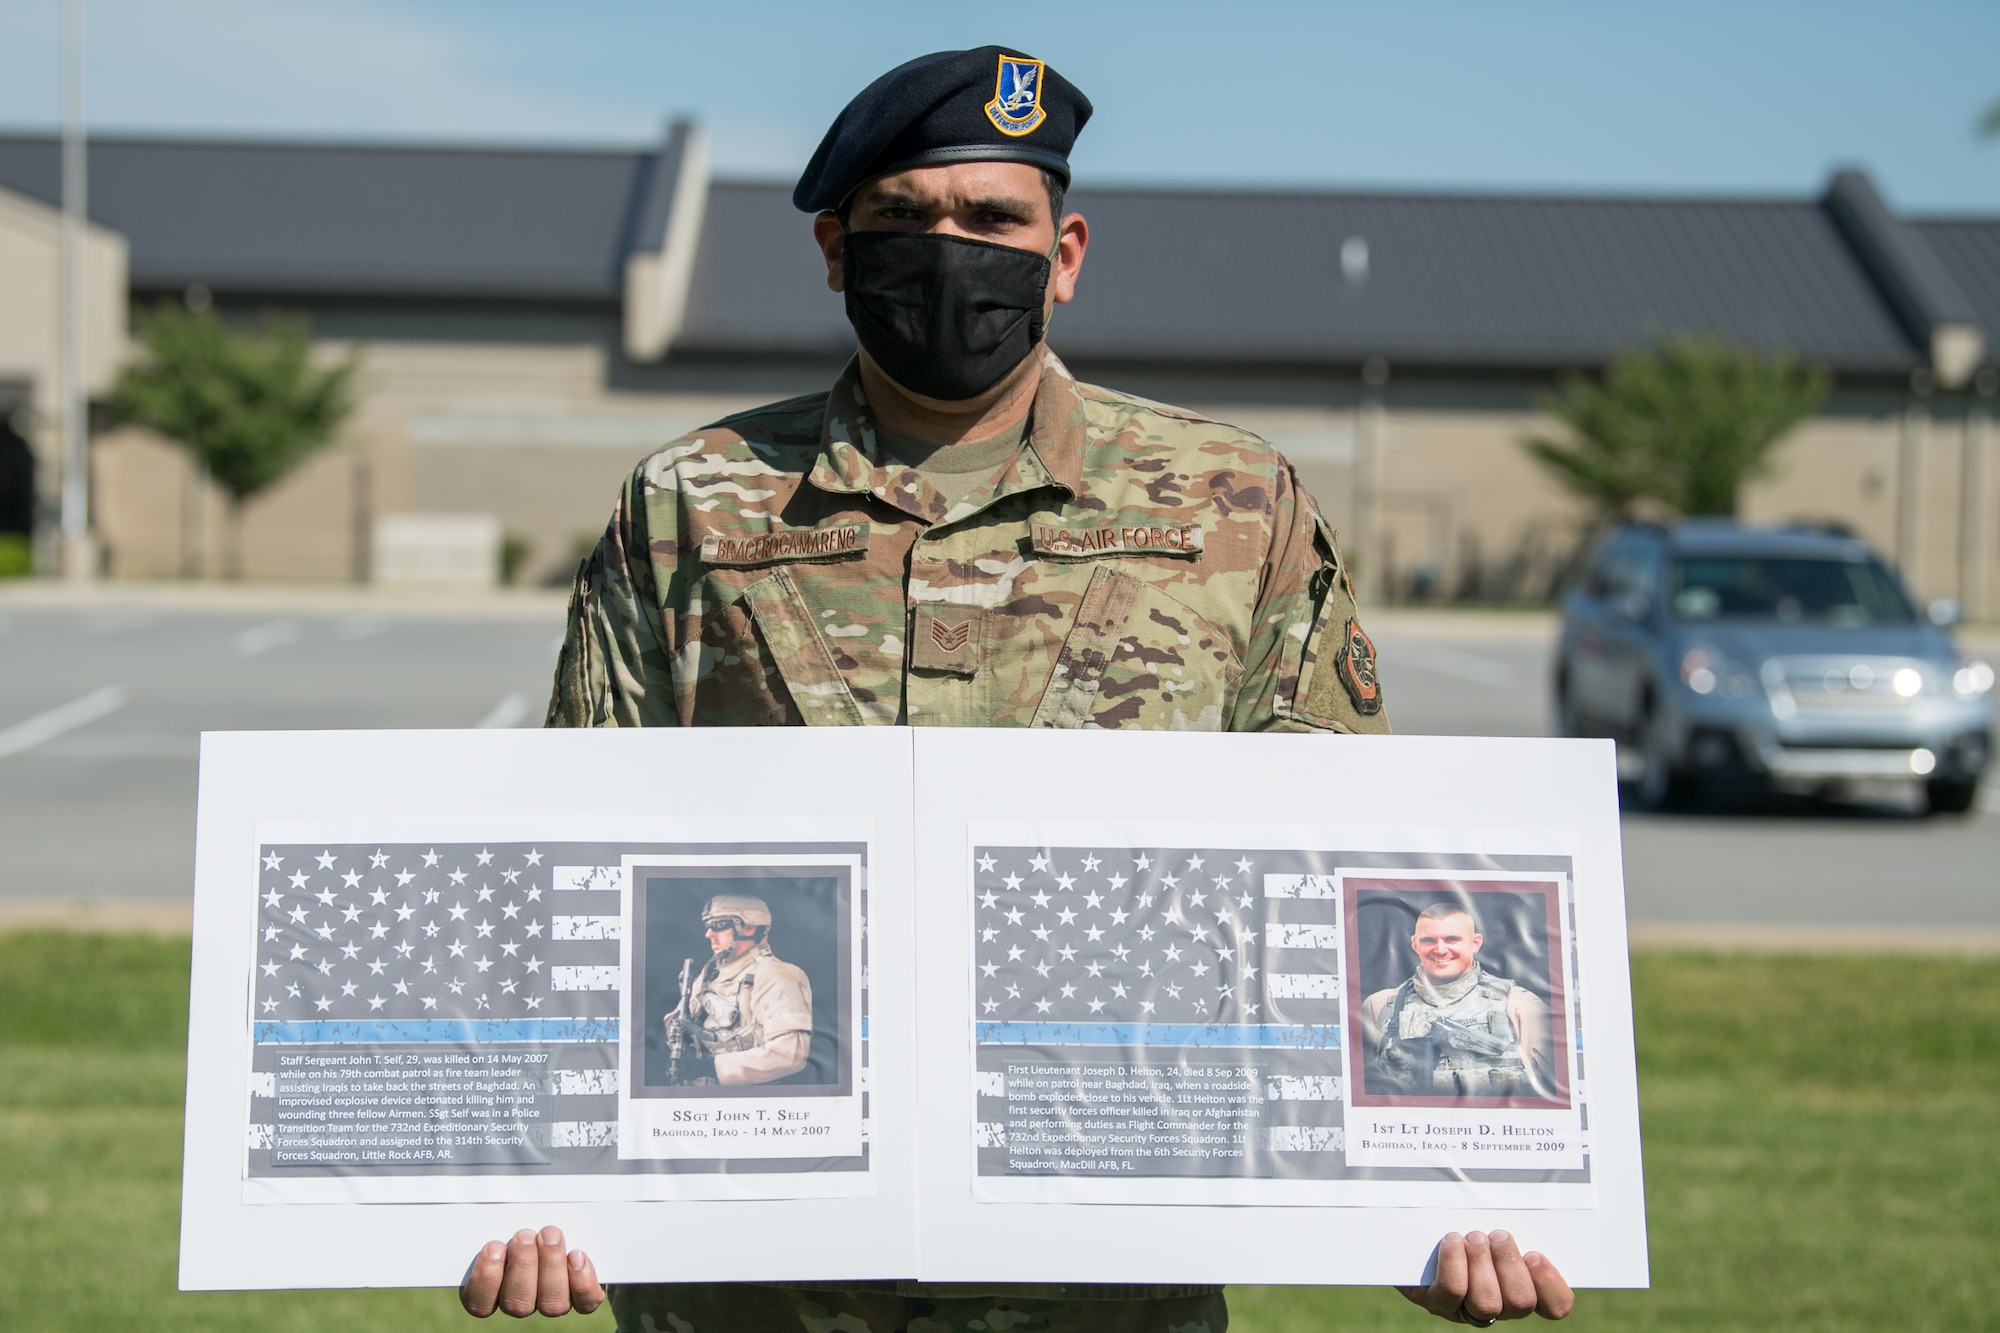 Staff Sgt. Jose Bracero-Camareno, 436th Security Forces Squadron combat arms instructor, holds photos of two fallen defenders during a retreat ceremony on Peace Officers Memorial Day May 15, 2020, at Dover Air Force Base, Delaware. The ceremony commemorating fallen military and civilian law enforcement officers marked the end of National Police Week 2020. (U.S. Air Force photo by Mauricio Campino)